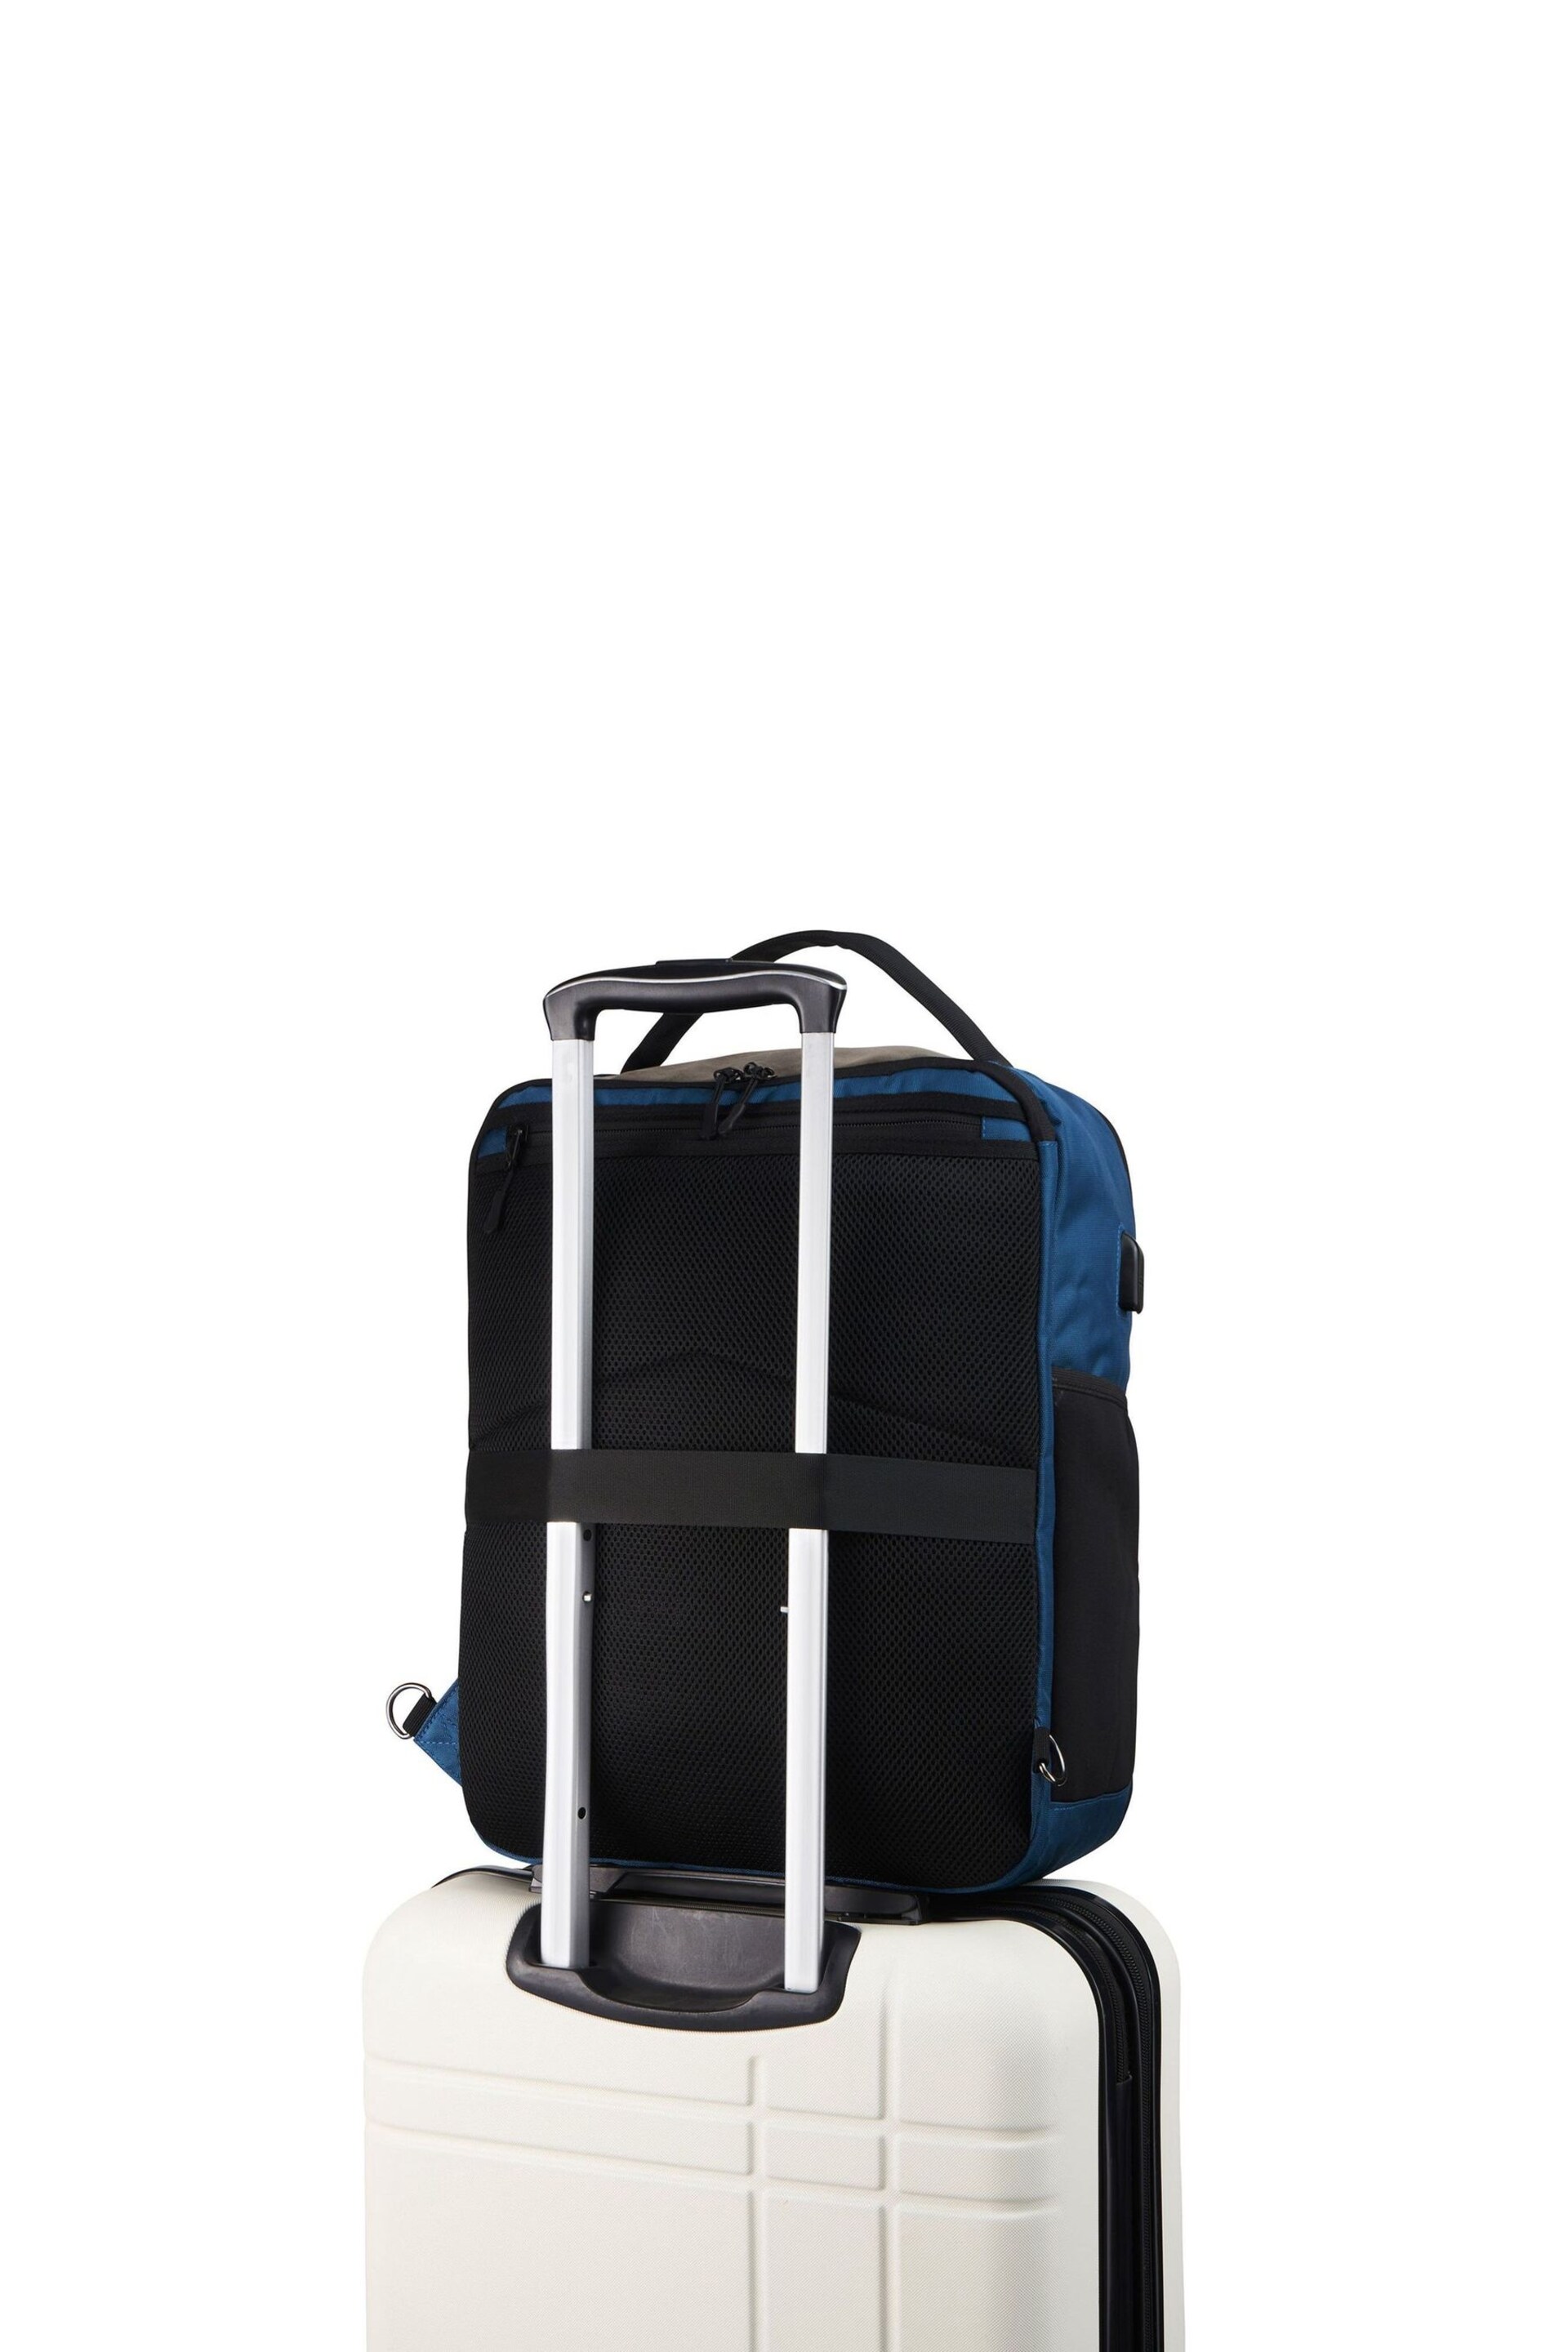 Cabin Max Underseat Backpack 30 Litre 45cm Manhattan USB - Image 4 of 5